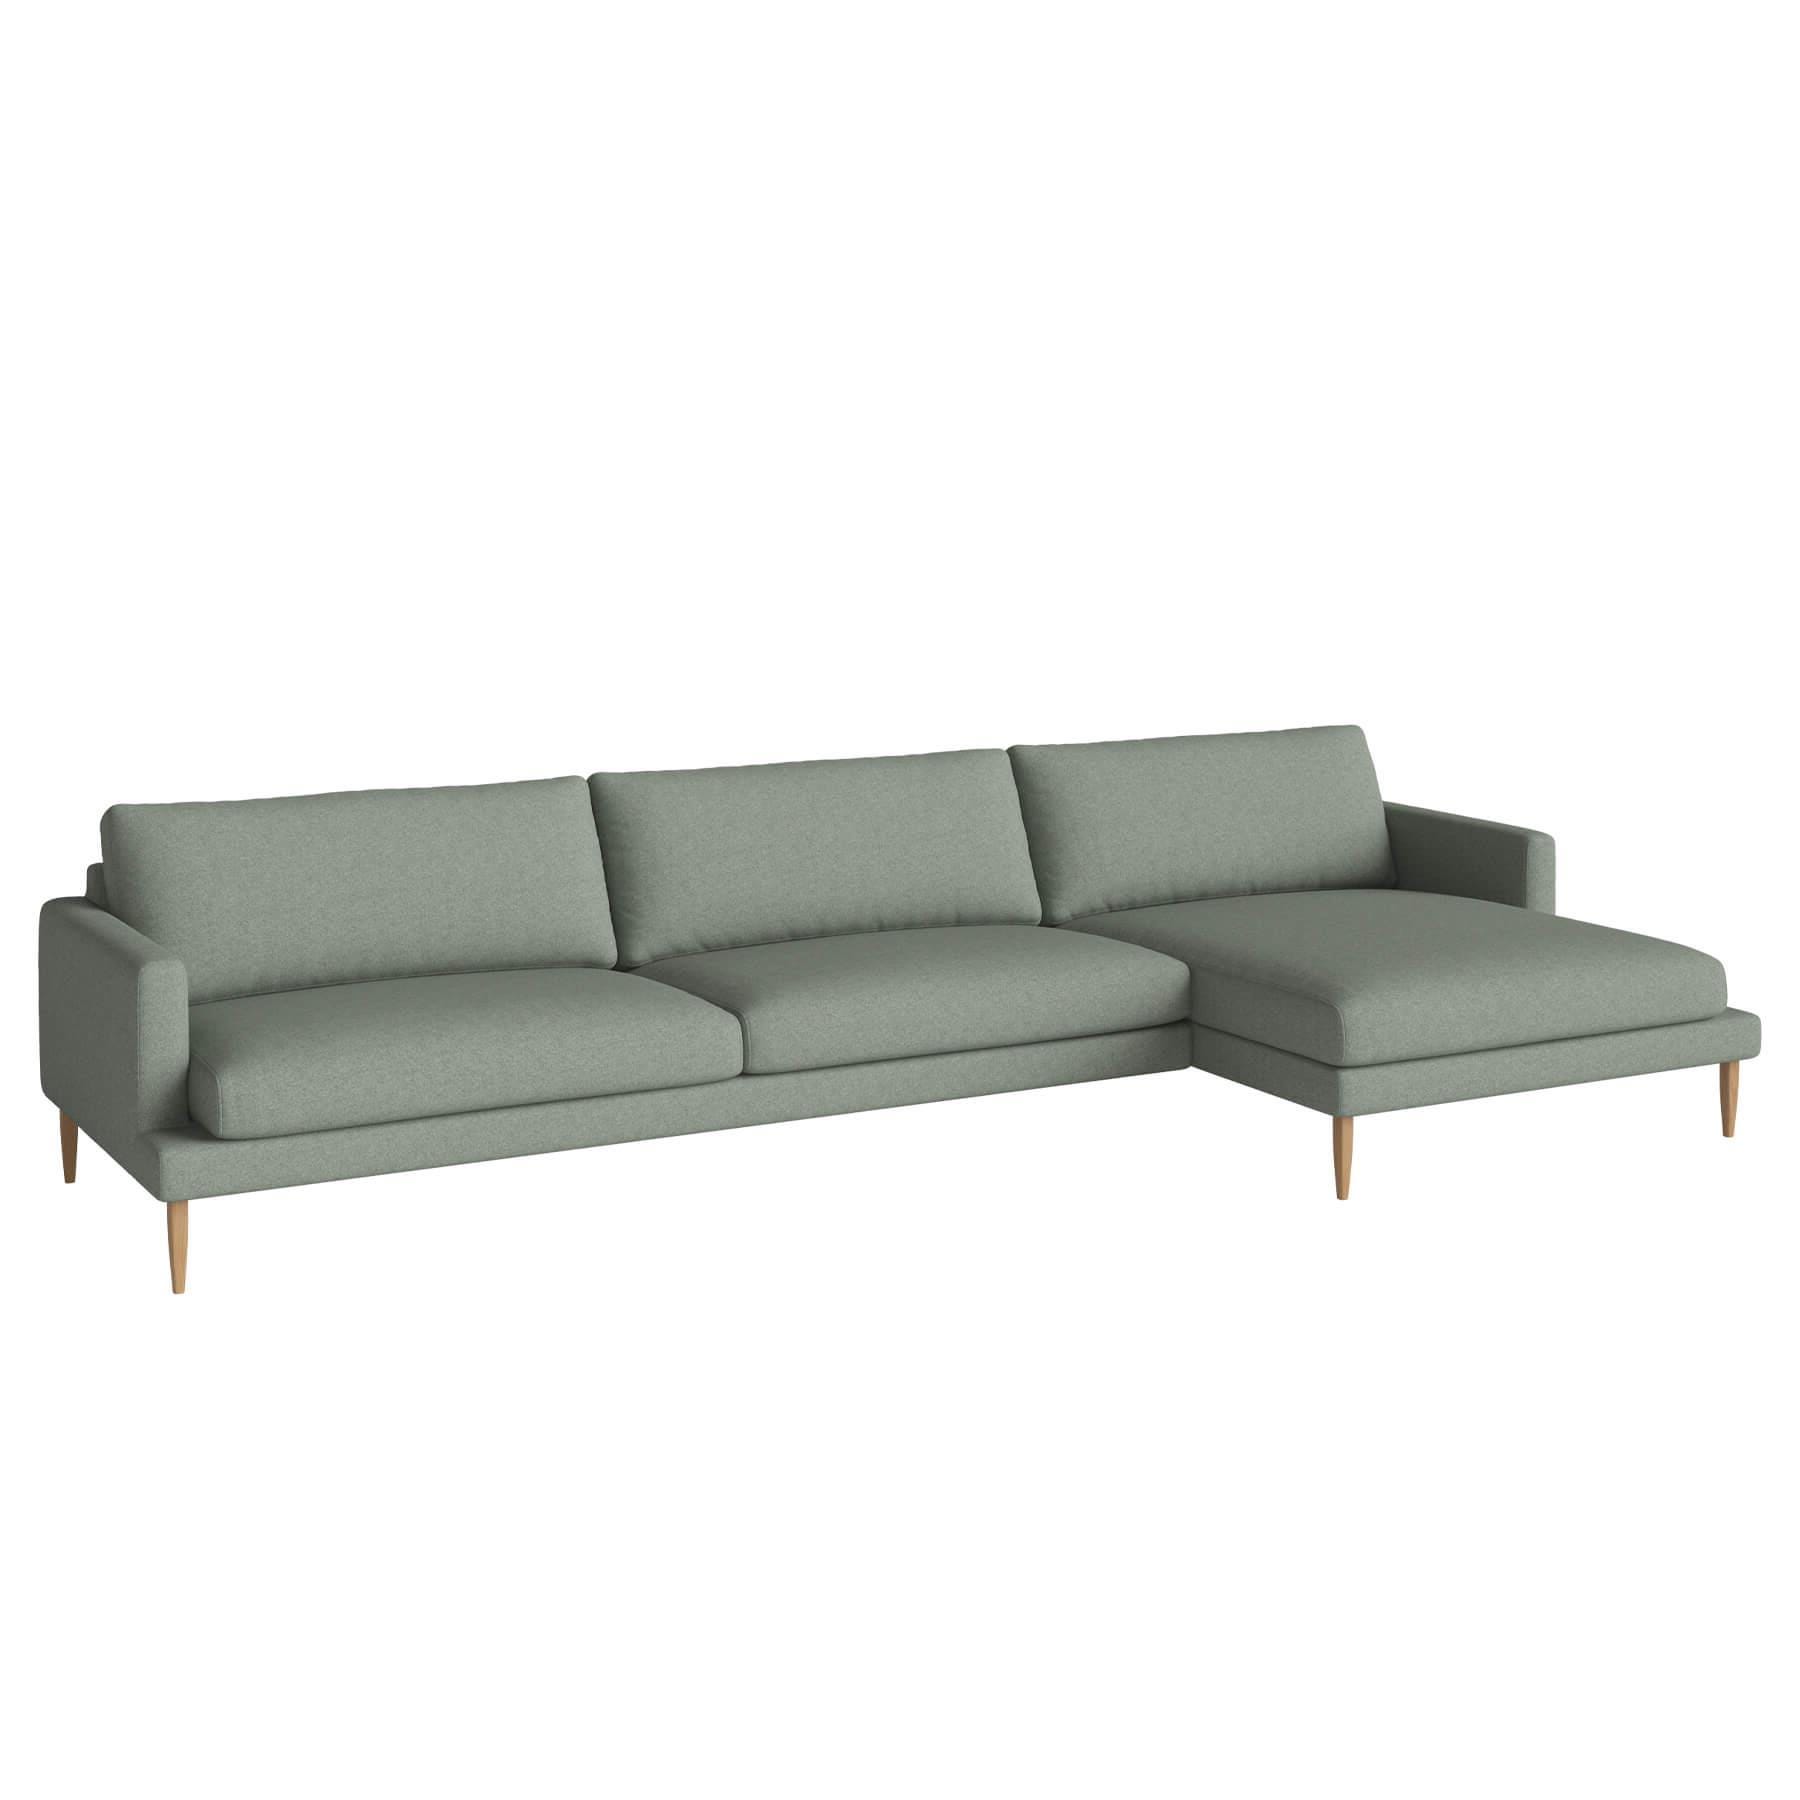 Bolia Veneda Sofa 45 Seater Sofa With Chaise Longue Oiled Oak Qual Green Right Green Designer Furniture From Holloways Of Ludlow